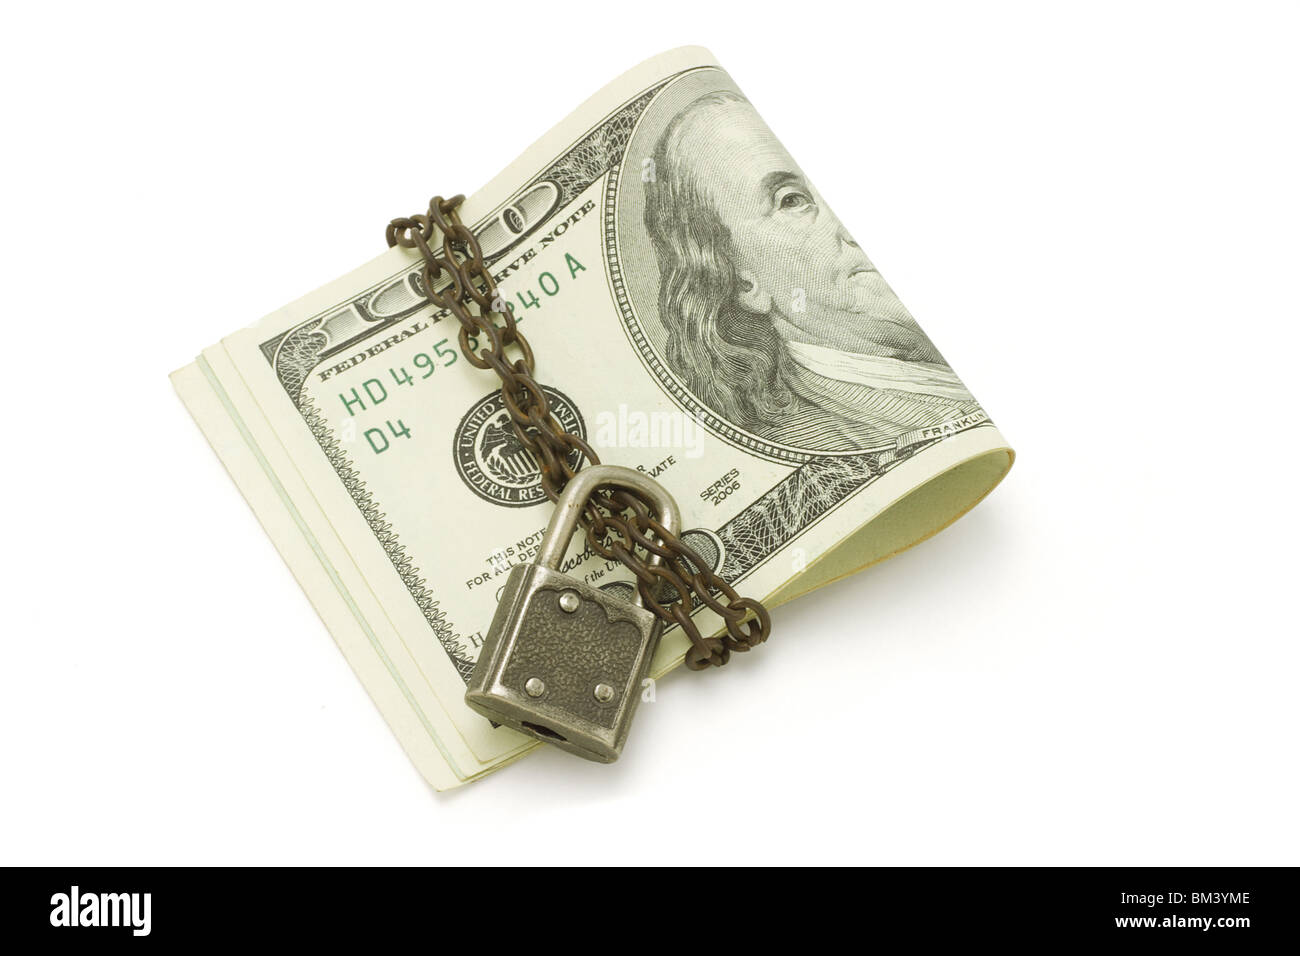 100 US dollars chained and locked on white background Stock Photo